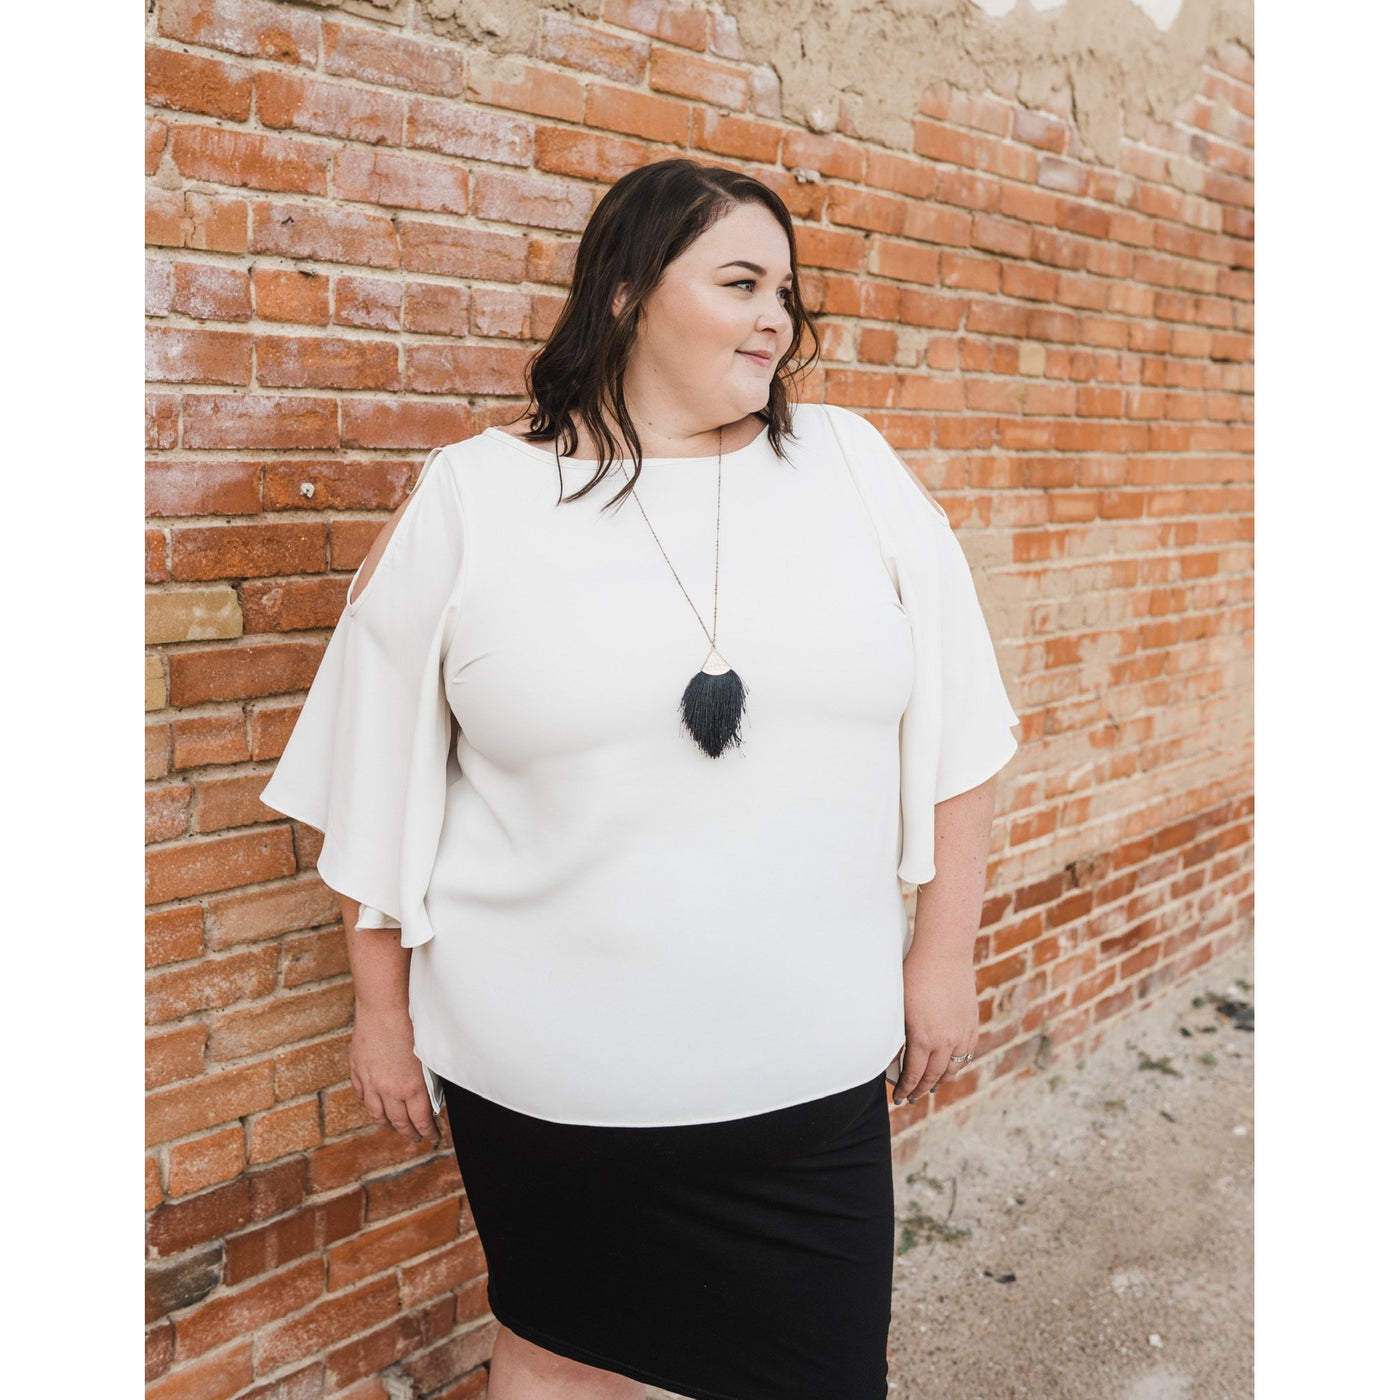 Corrigan Top with Peekaboo Details - Cream-W Top-Graceful & Chic Boutique, Family Clothing Store in Waxahachie, Texas